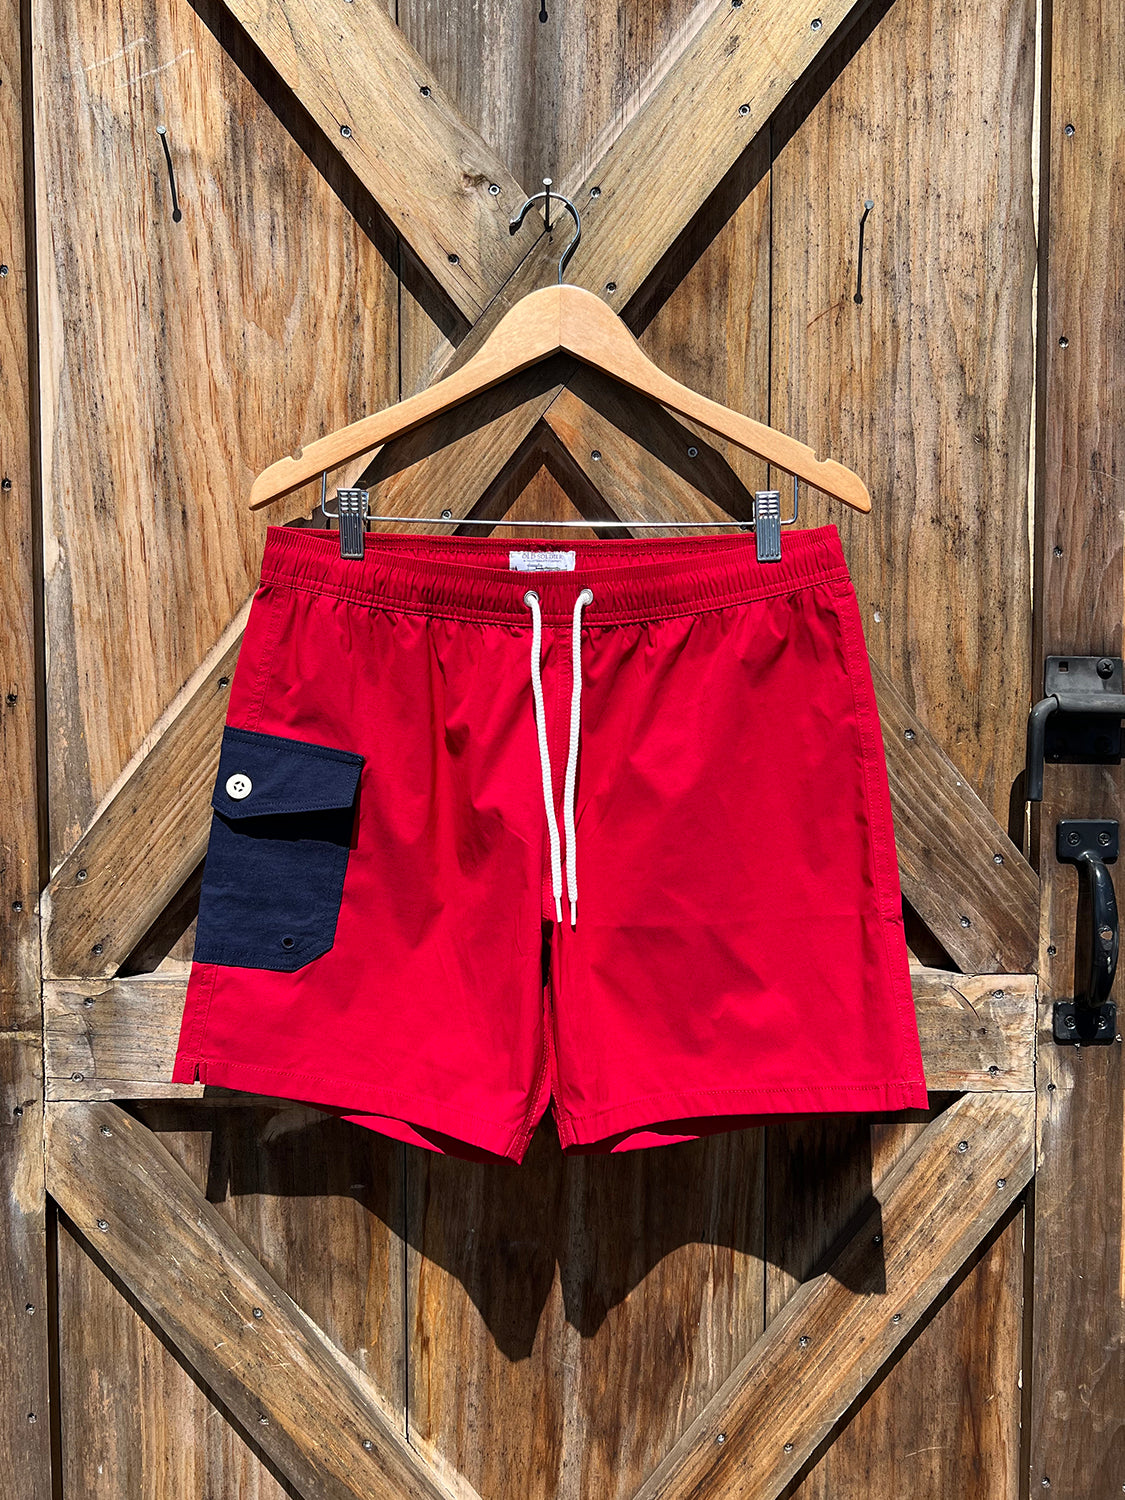 OLD SOLDIER x J. CREW - Deck Crew Boat Shorts - Lifeguard Red